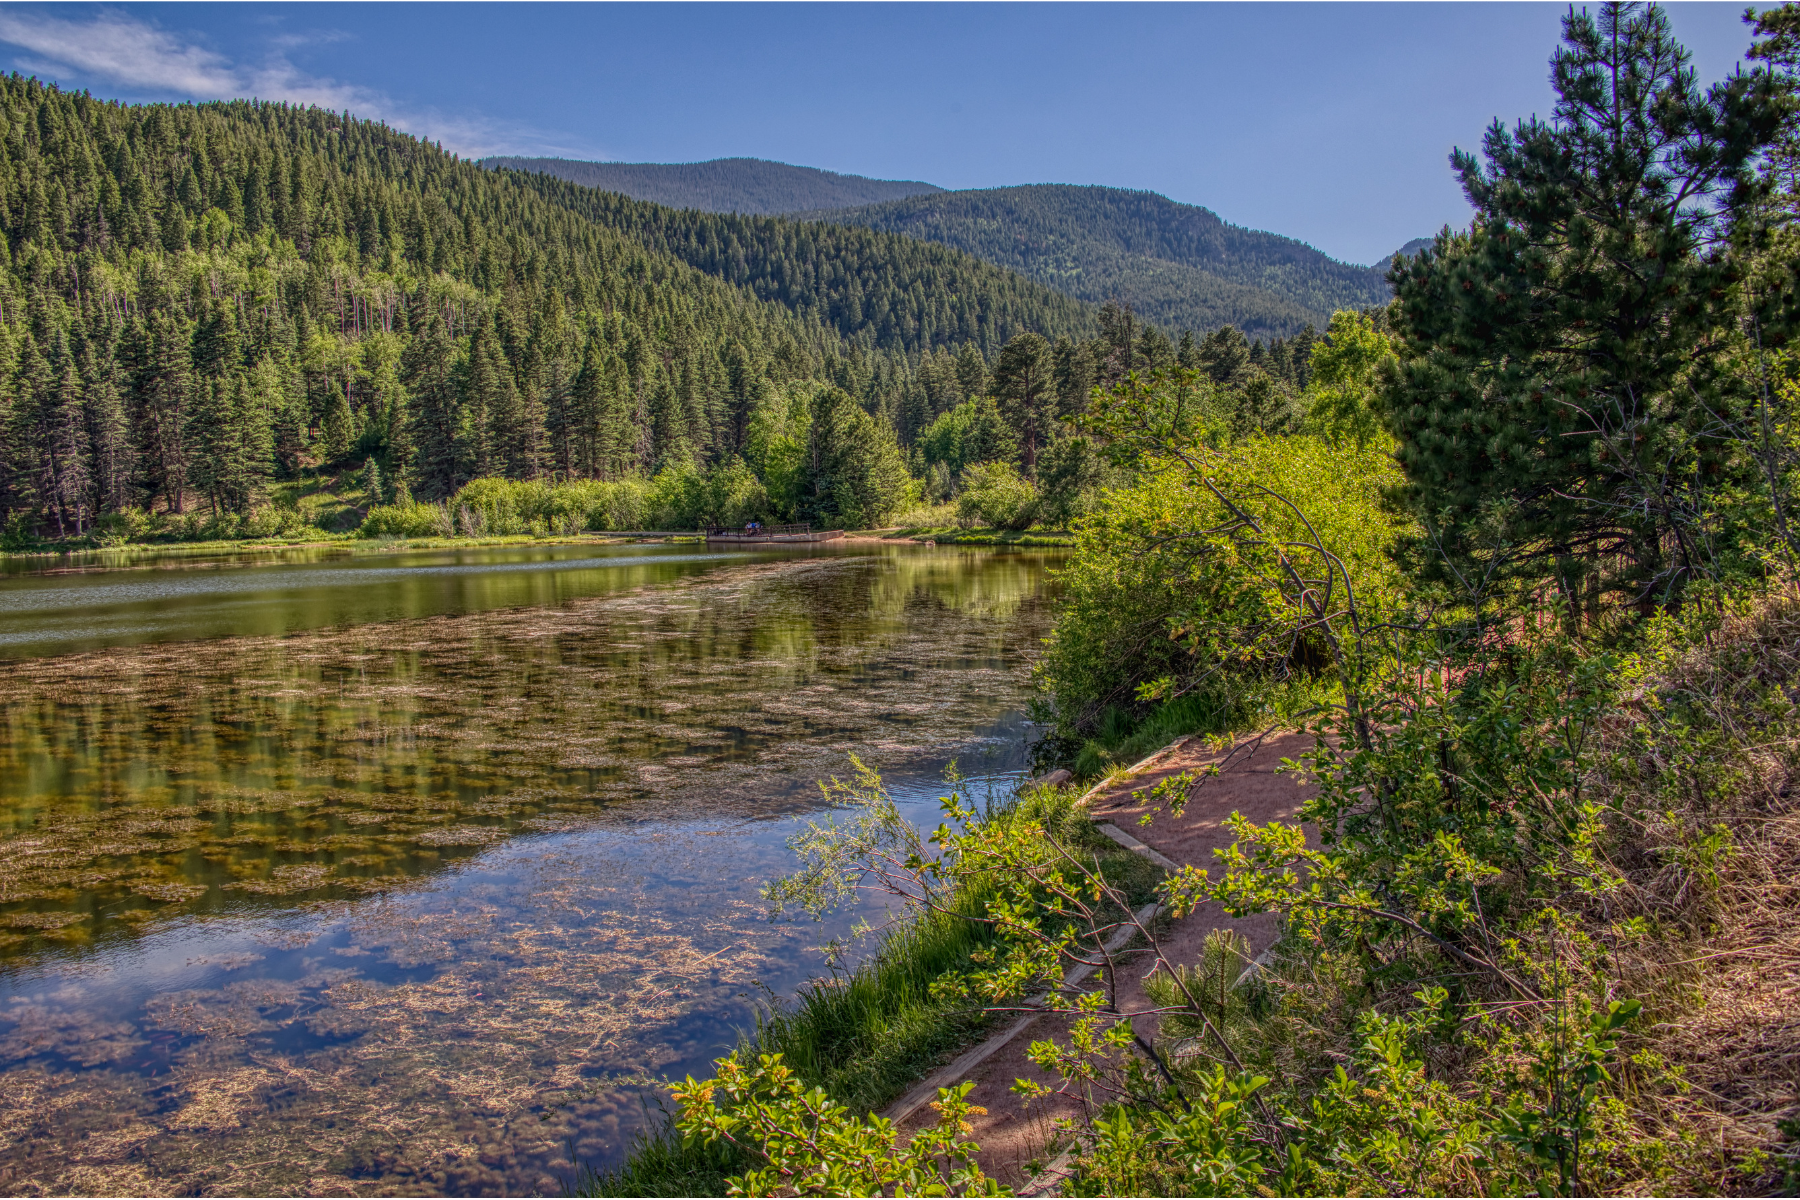 Visit San Isabel National Forest for summer camping in Colorado